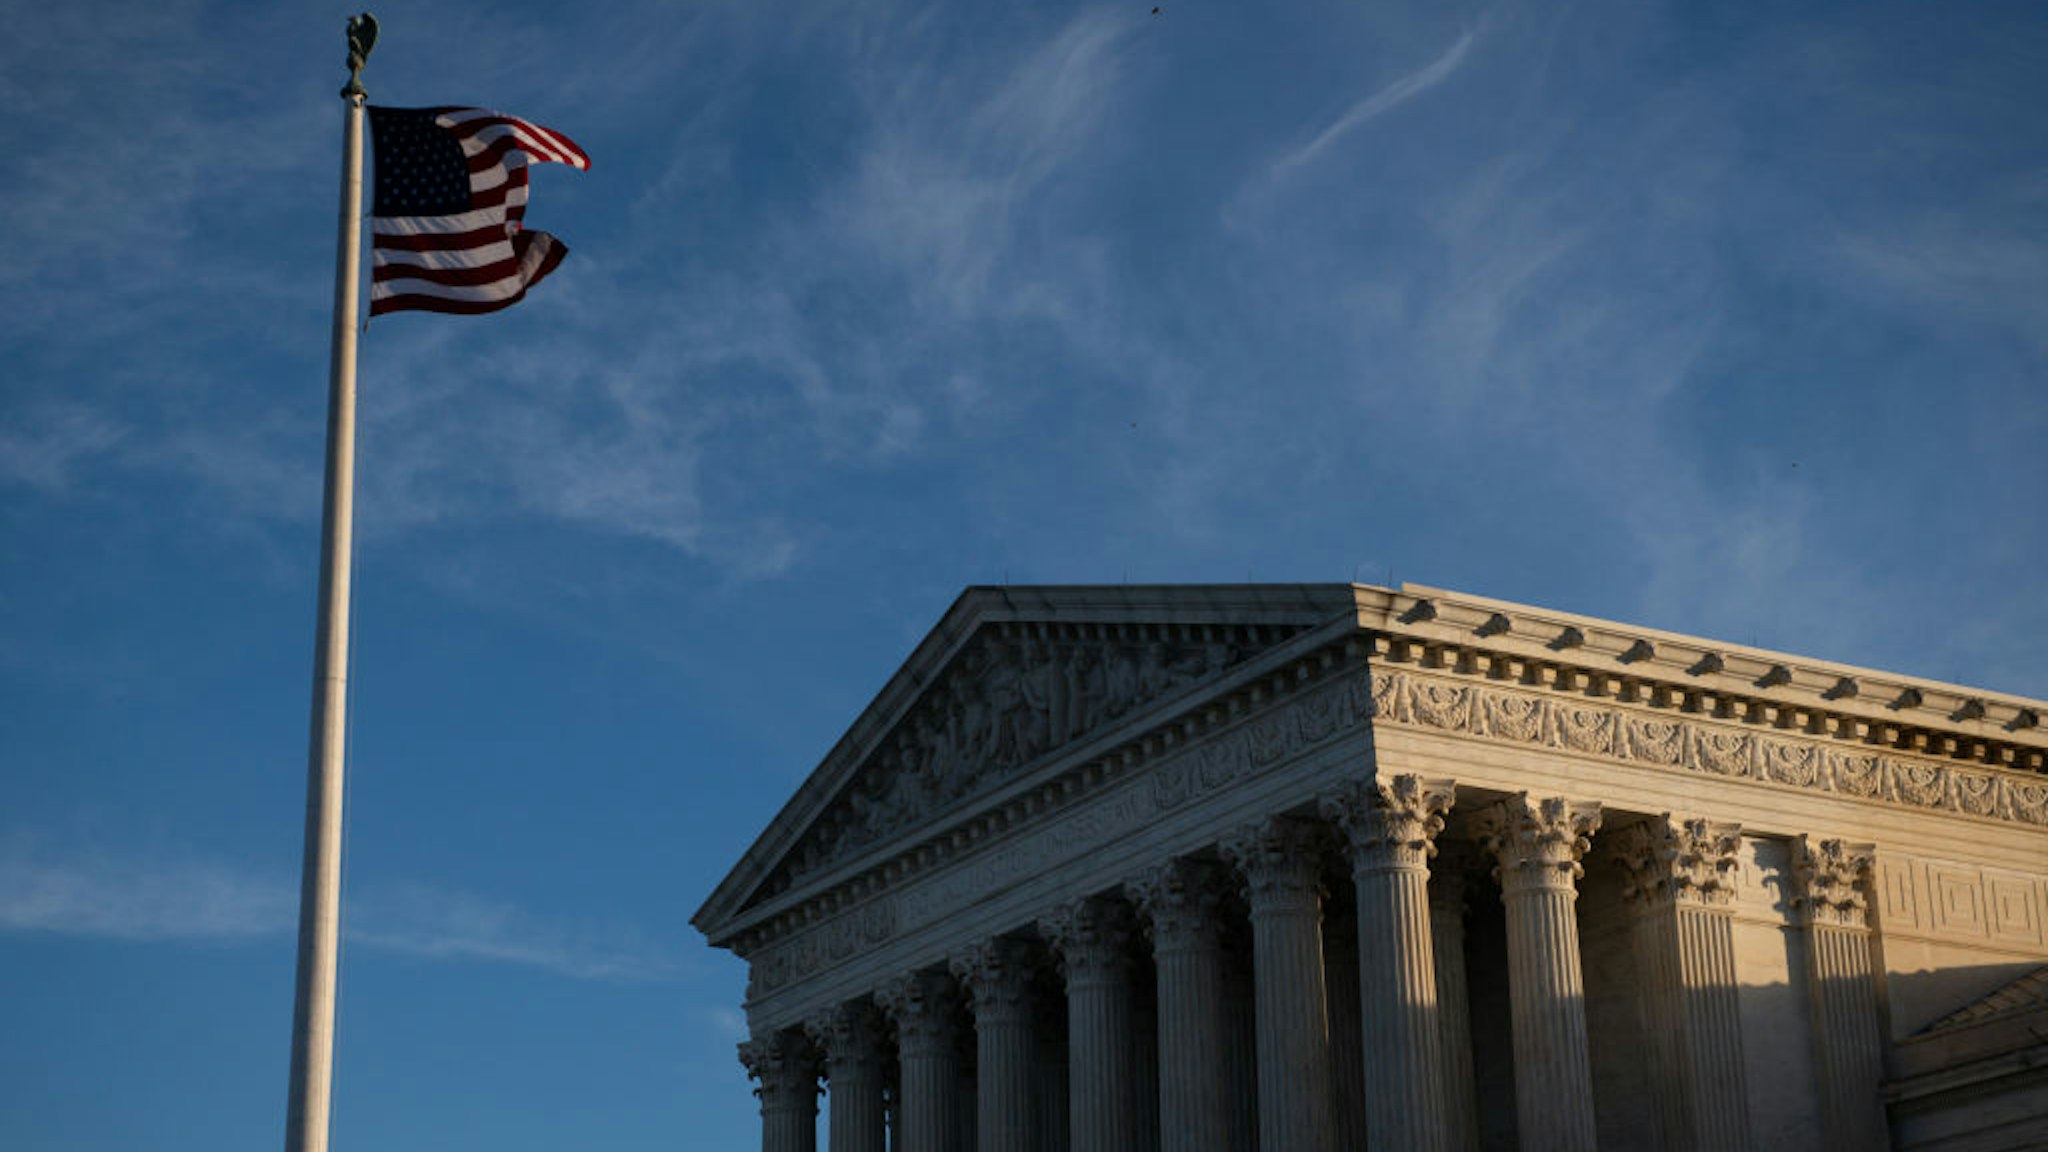 An American flag flies outside of the U.S. Supreme Court in Washington, D.C., U.S., on Saturday, Jan. 9, 2021. House Democrats are prepared to impeach President Donald Trump if he doesn't immediately resign, House Speaker Nancy Pelosi said, as the president came under increasing pressure from members of both parties for encouraging a mob that stormed the U.S. Capitol